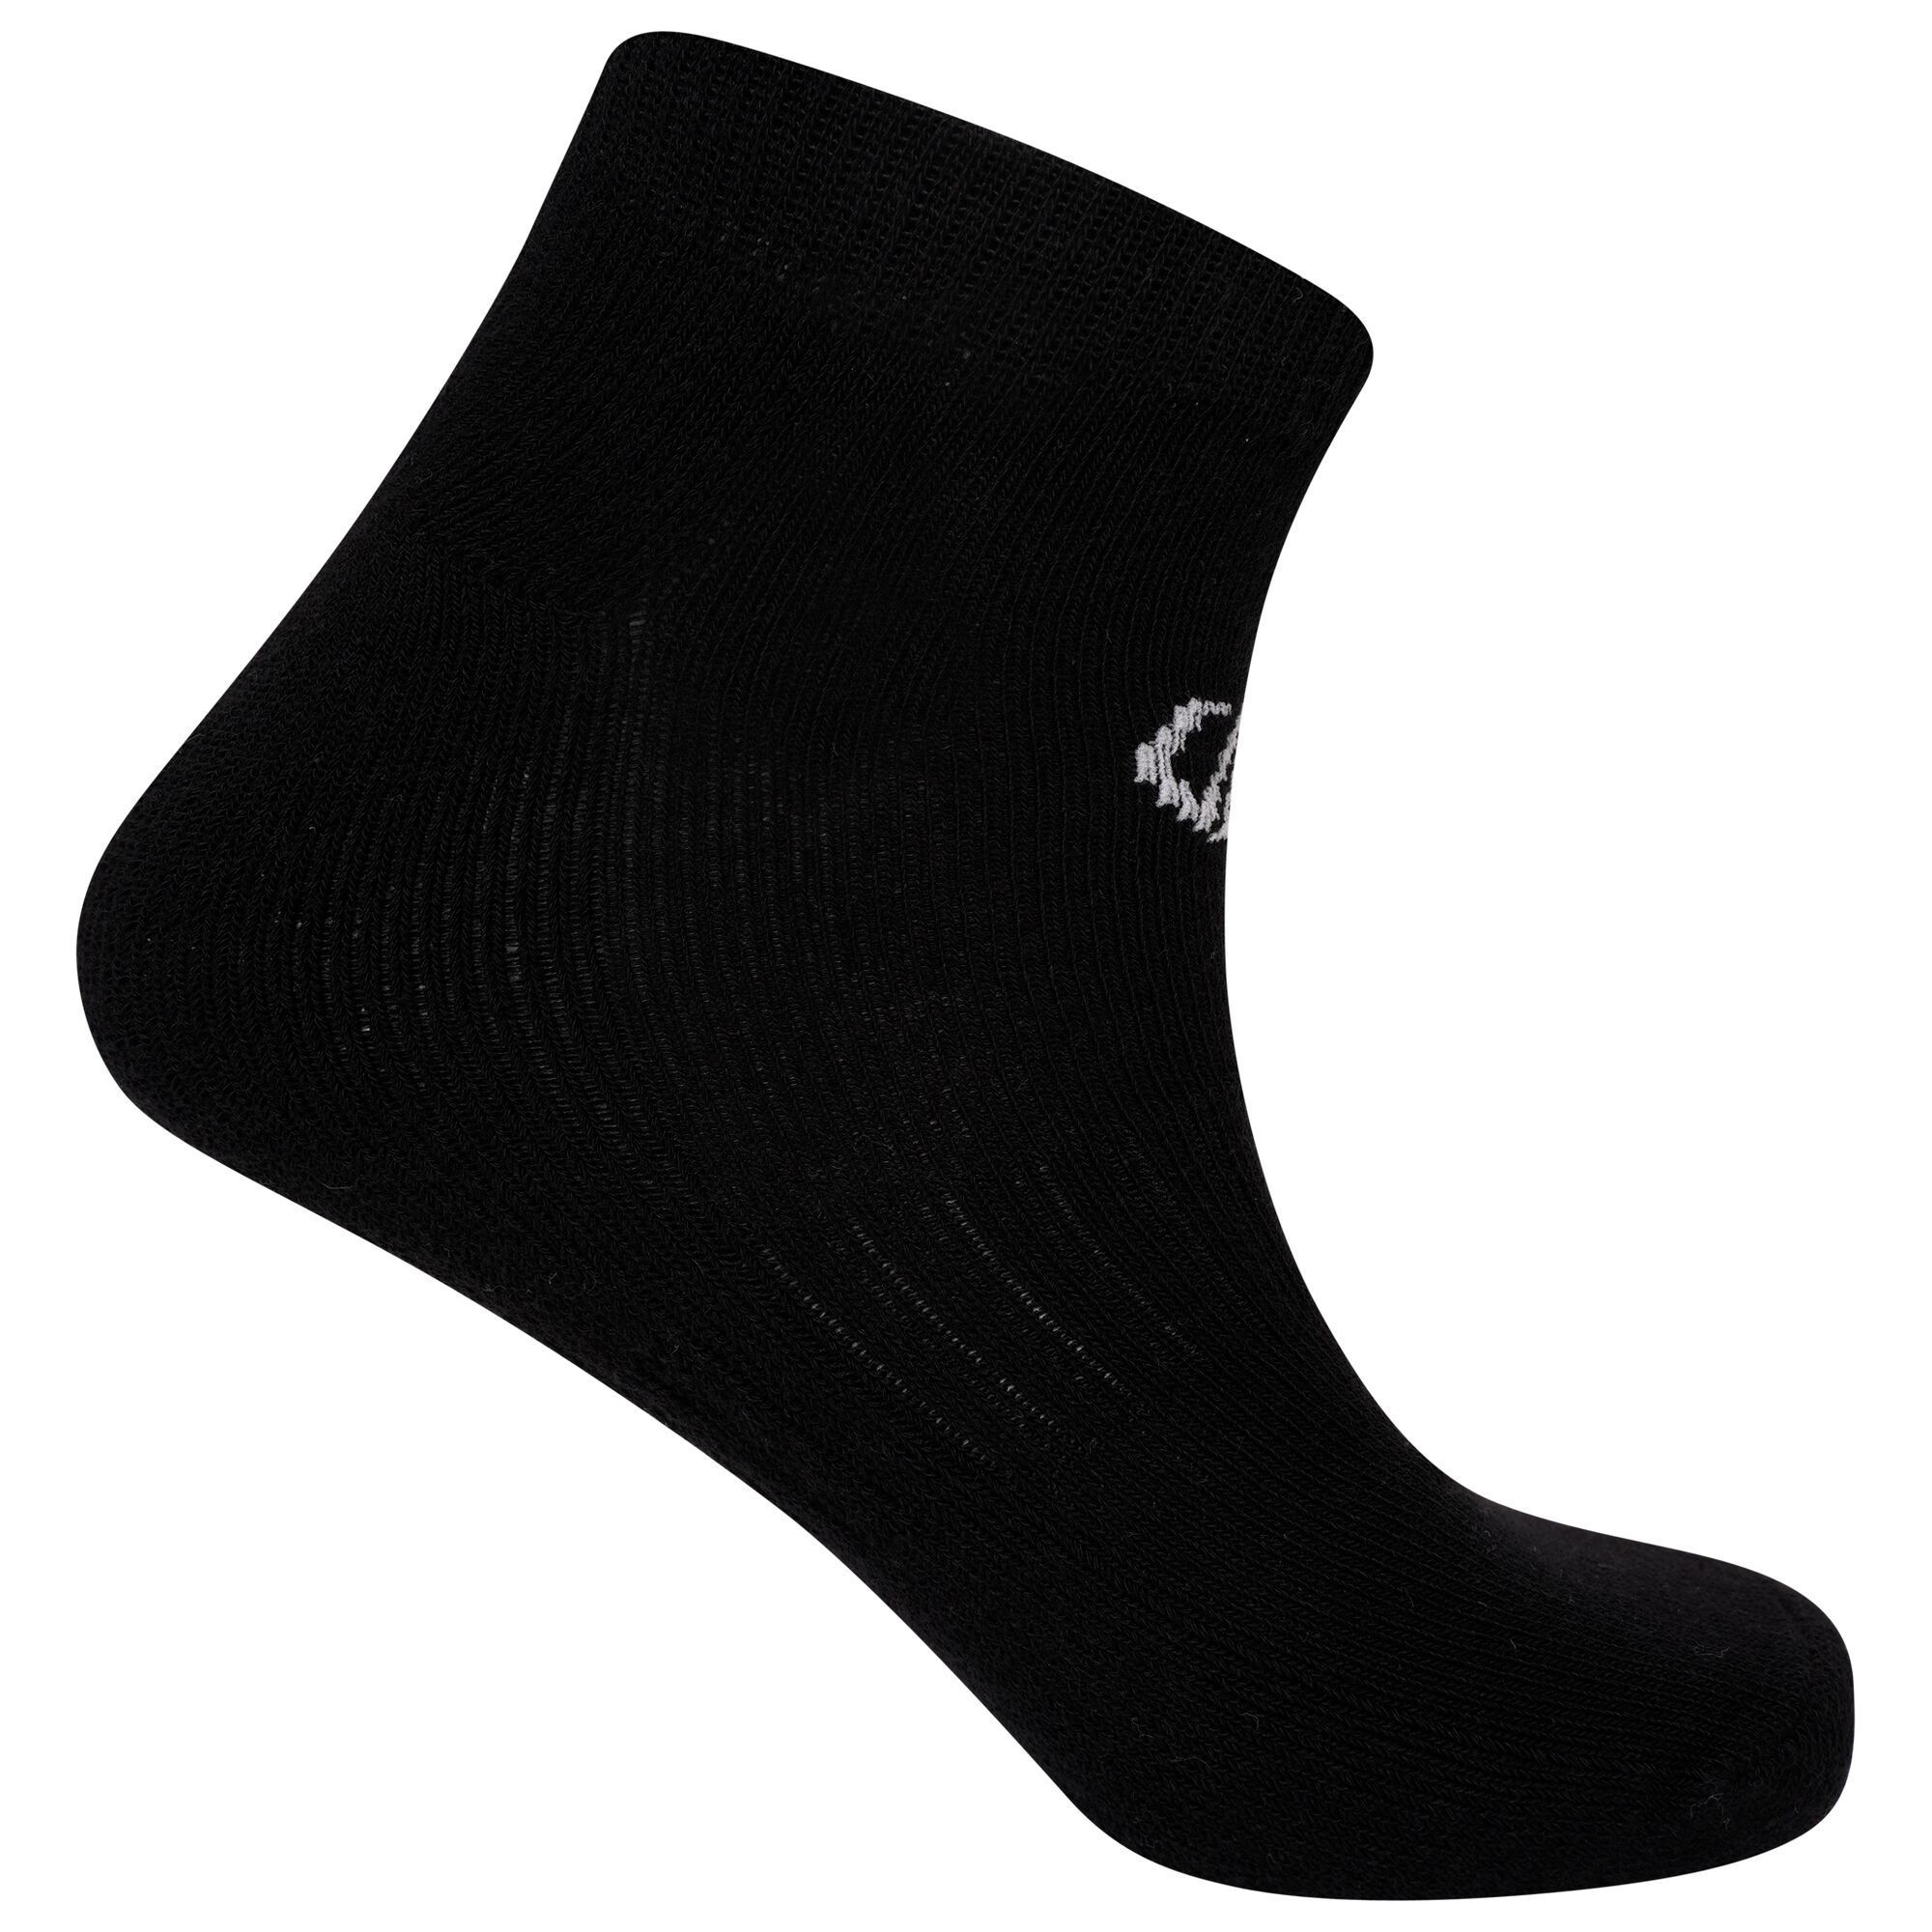 70% Cotton, 25% Polyester, 3% Elastodiene, 2% Elastane. Fabric: Cotton Blend, Stretch. Design: Logo, Plain, Ribbed. Arch Support, Moisture Wicking, Terry Loop. Fabric Technology: Durable. Cuff: Ribbed.